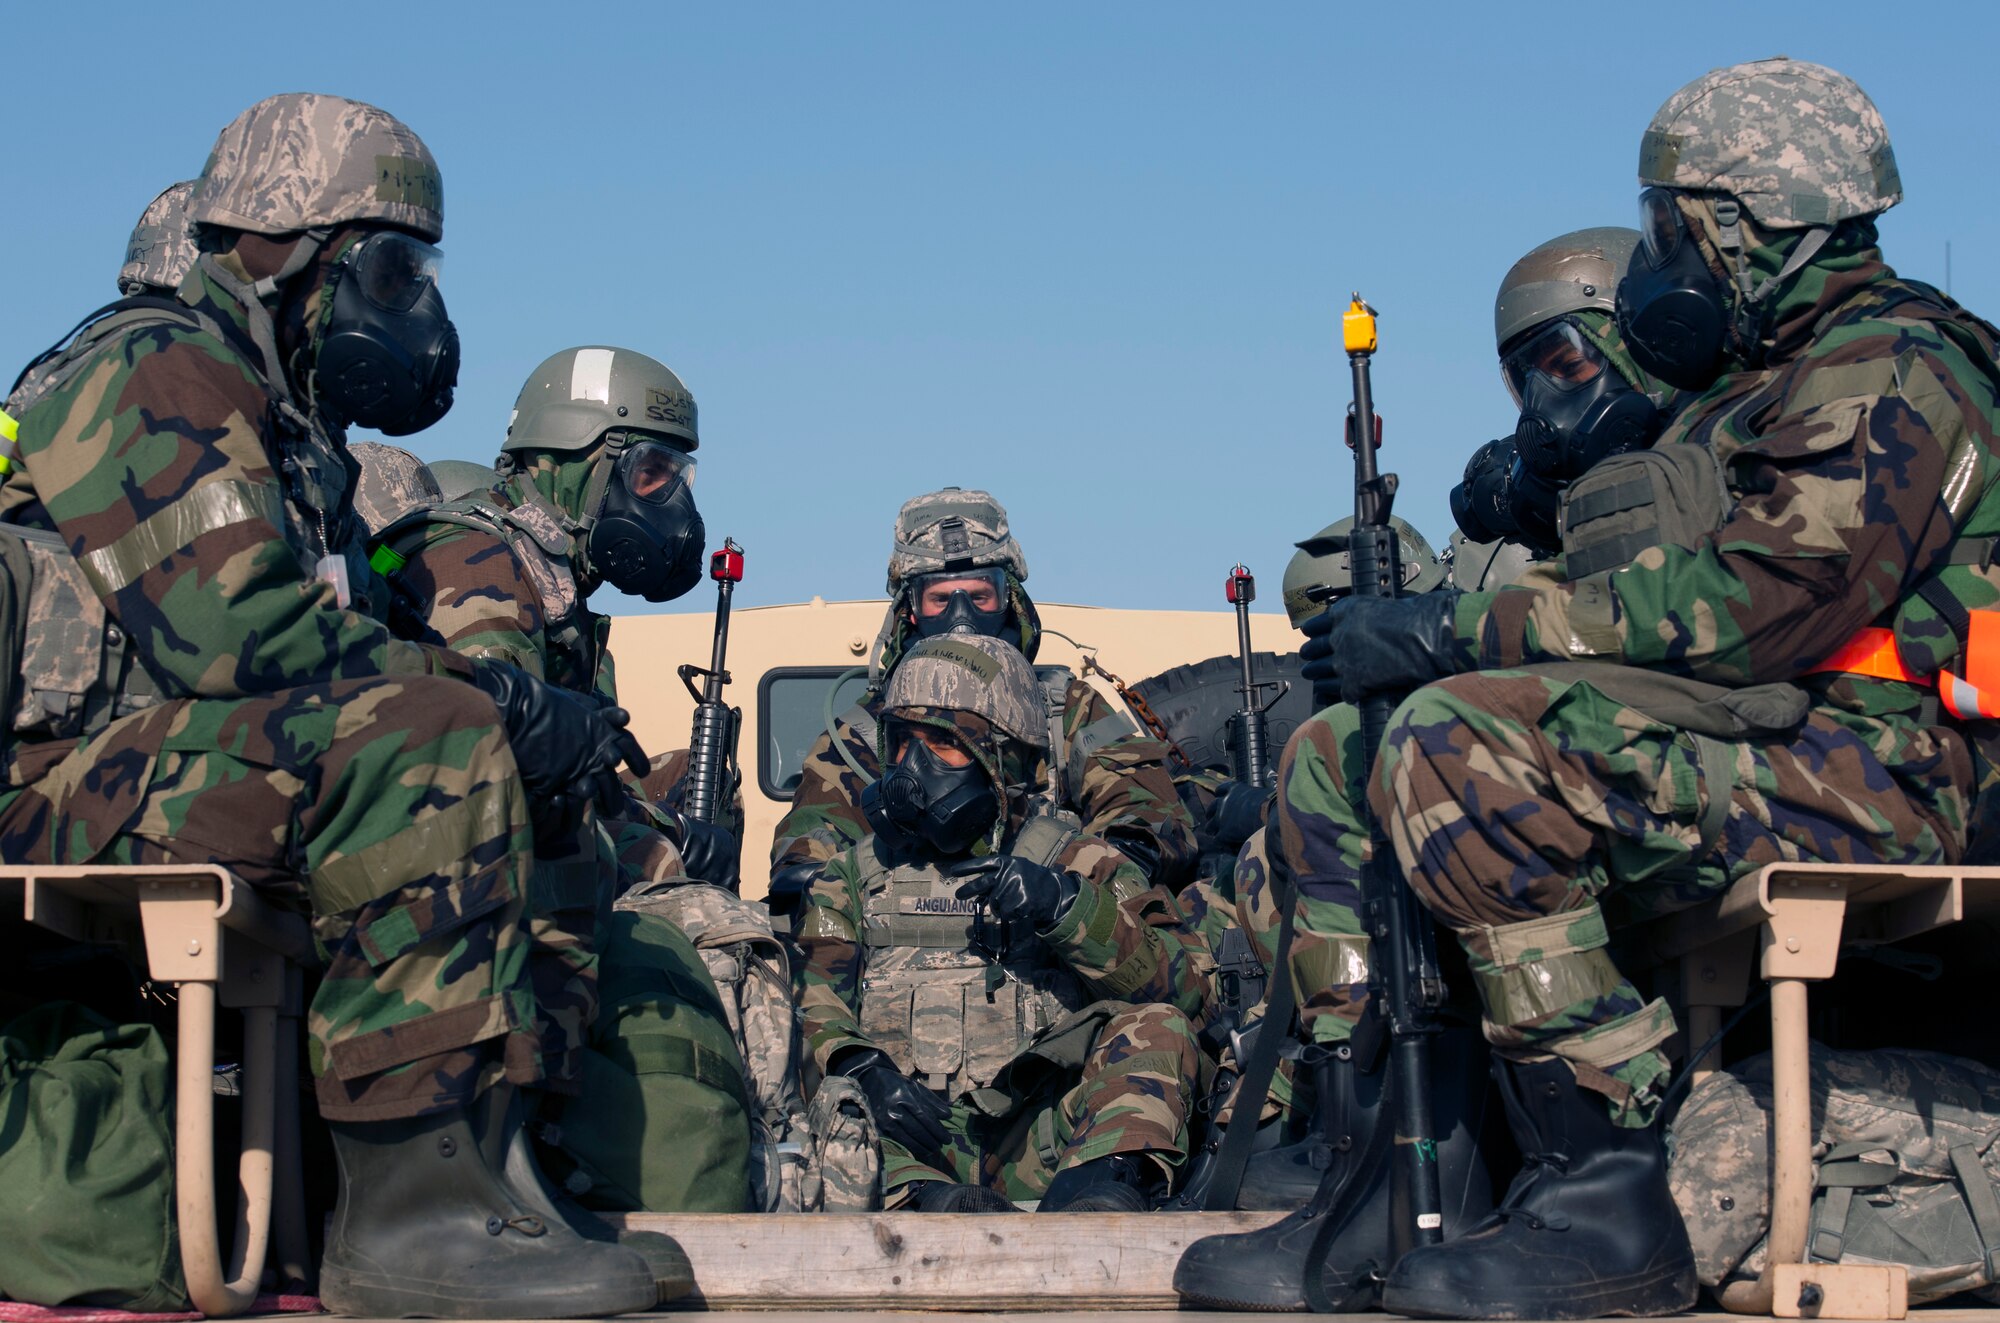 Augmentees and response force Airmen from the 8th Security Forces Squadron prepare for a shift change after working long shifts during Exercise Beverly Midnight 16-3 at Kunsan Air Base, Republic of Korea, May 4, 2016. The exercise tested Airmen on their ability to survive and operate while under the stress of simulated wartime activities all while ensuring rapid aircraft generation. (U.S. Air Force photo by Staff Sgt. Nick Wilson/Released)